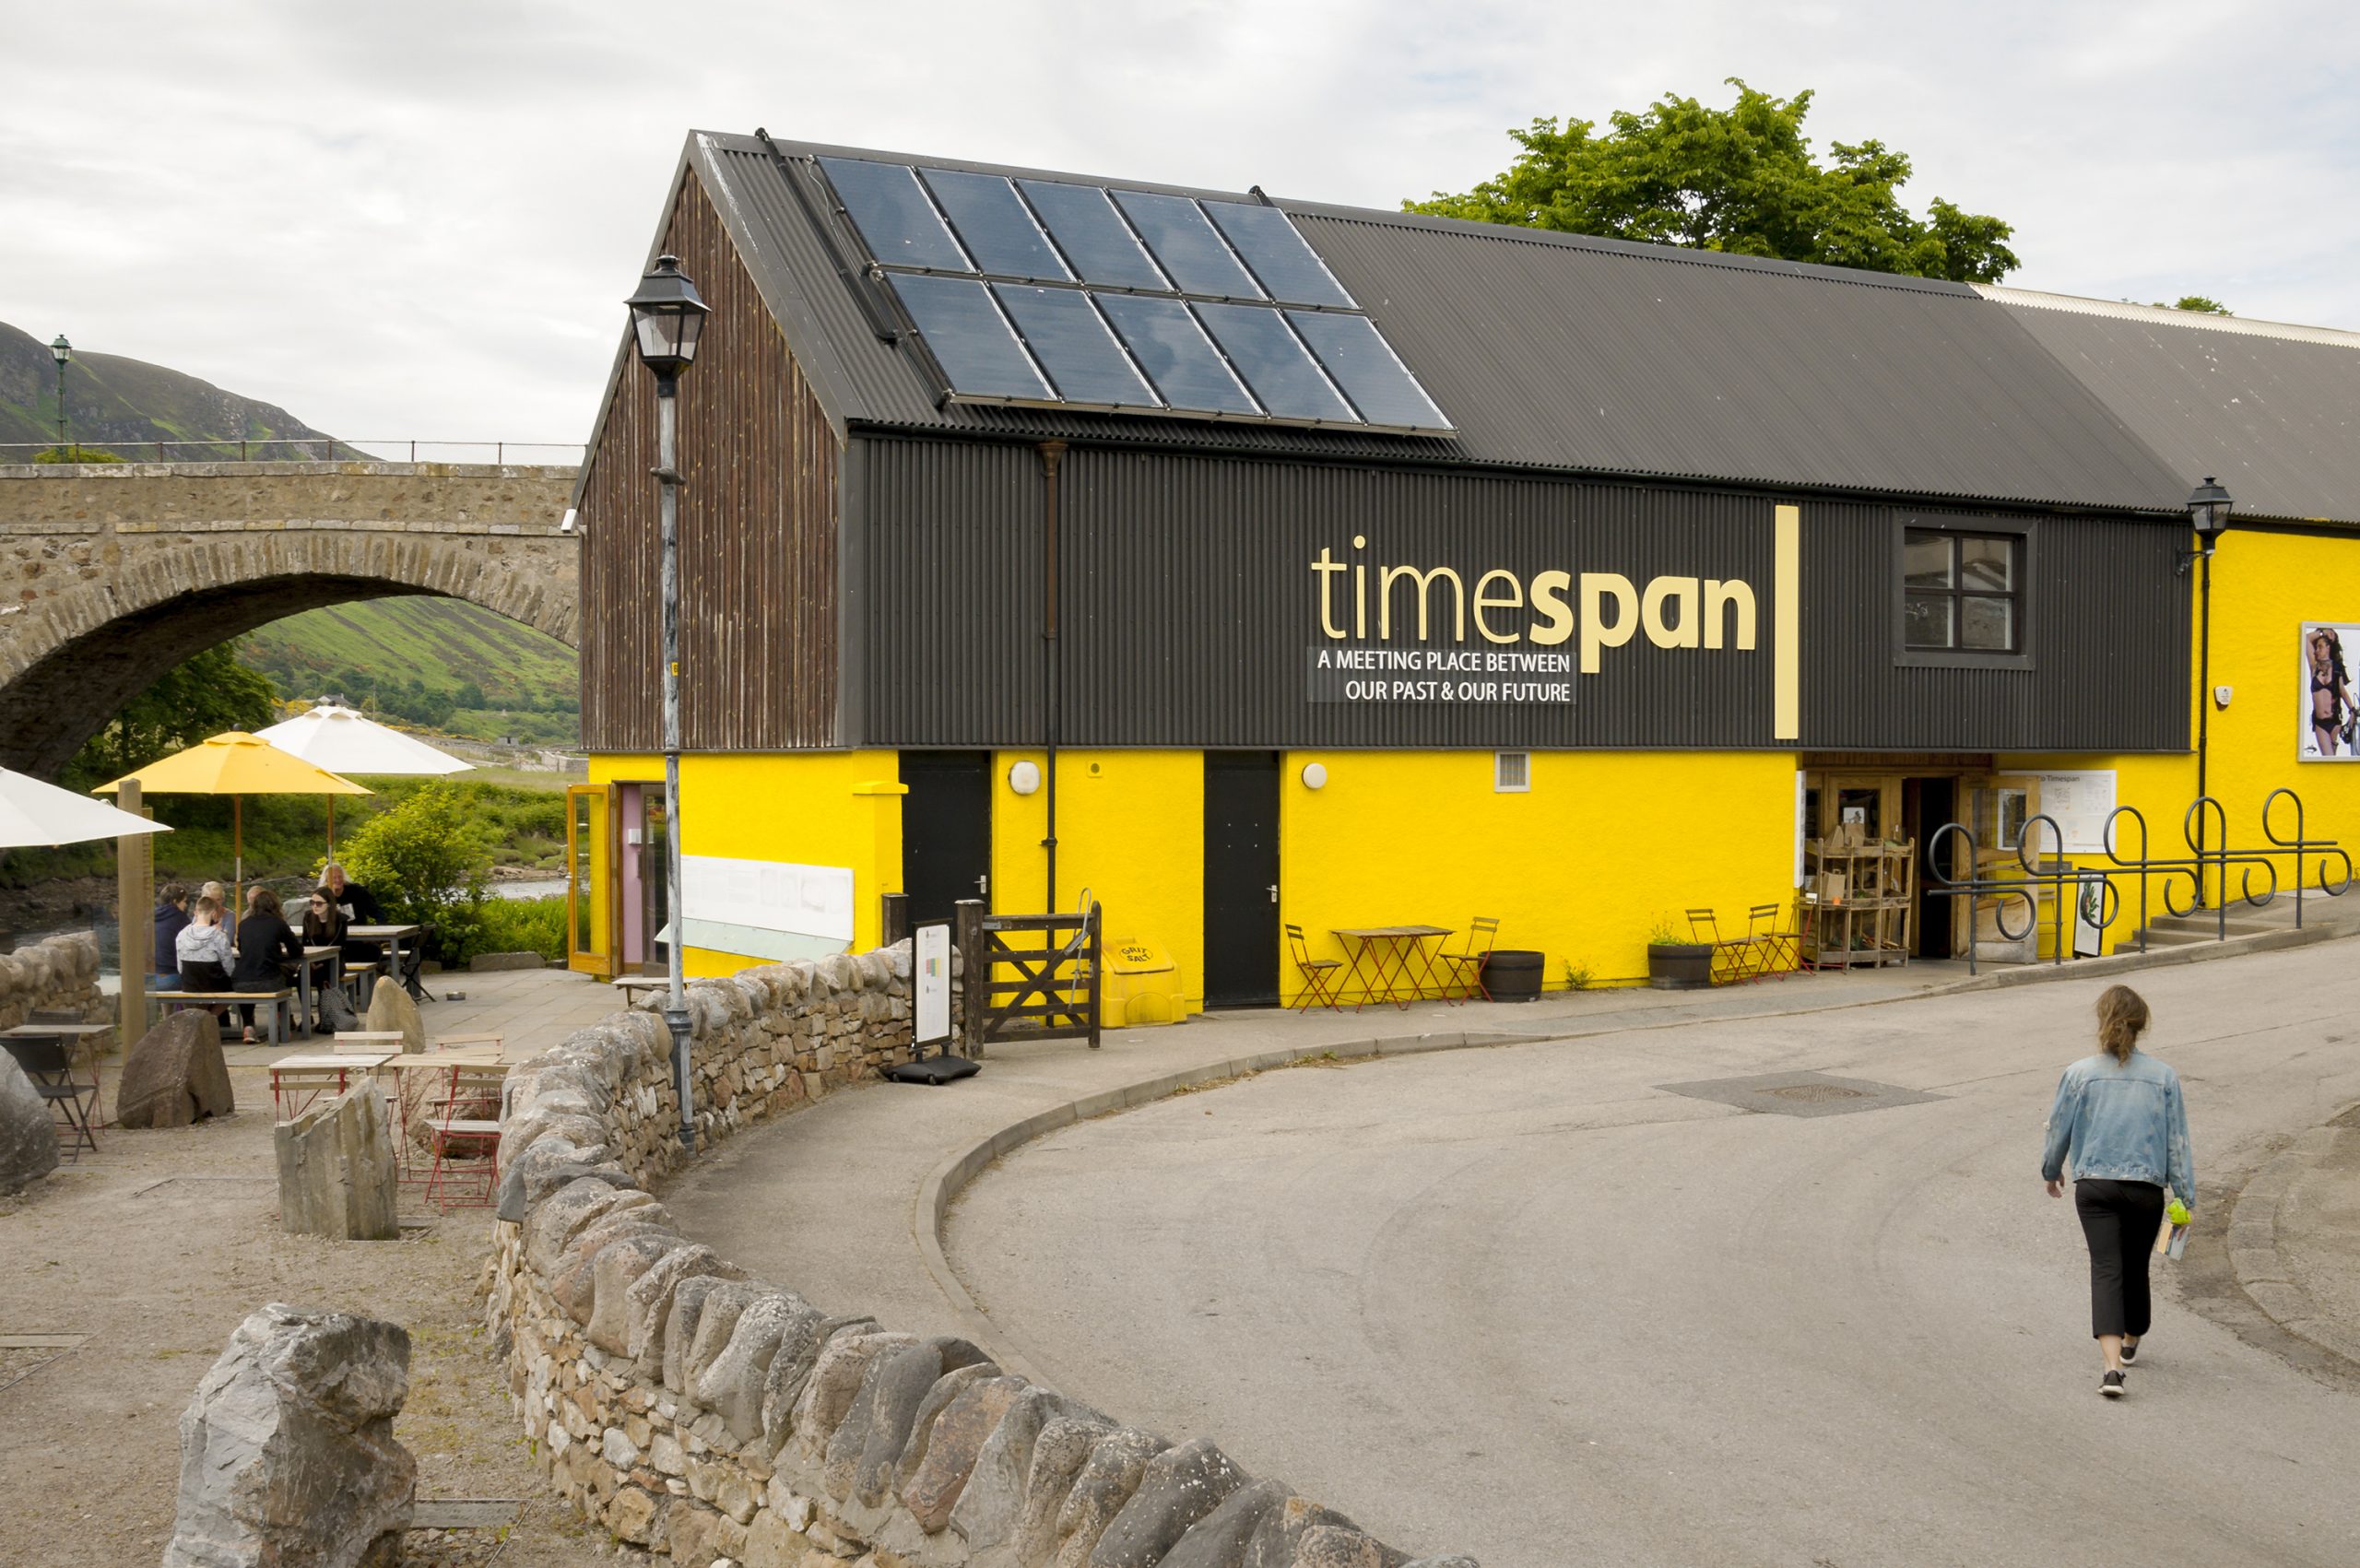 Timespan nominated for Museum of the Year 2021